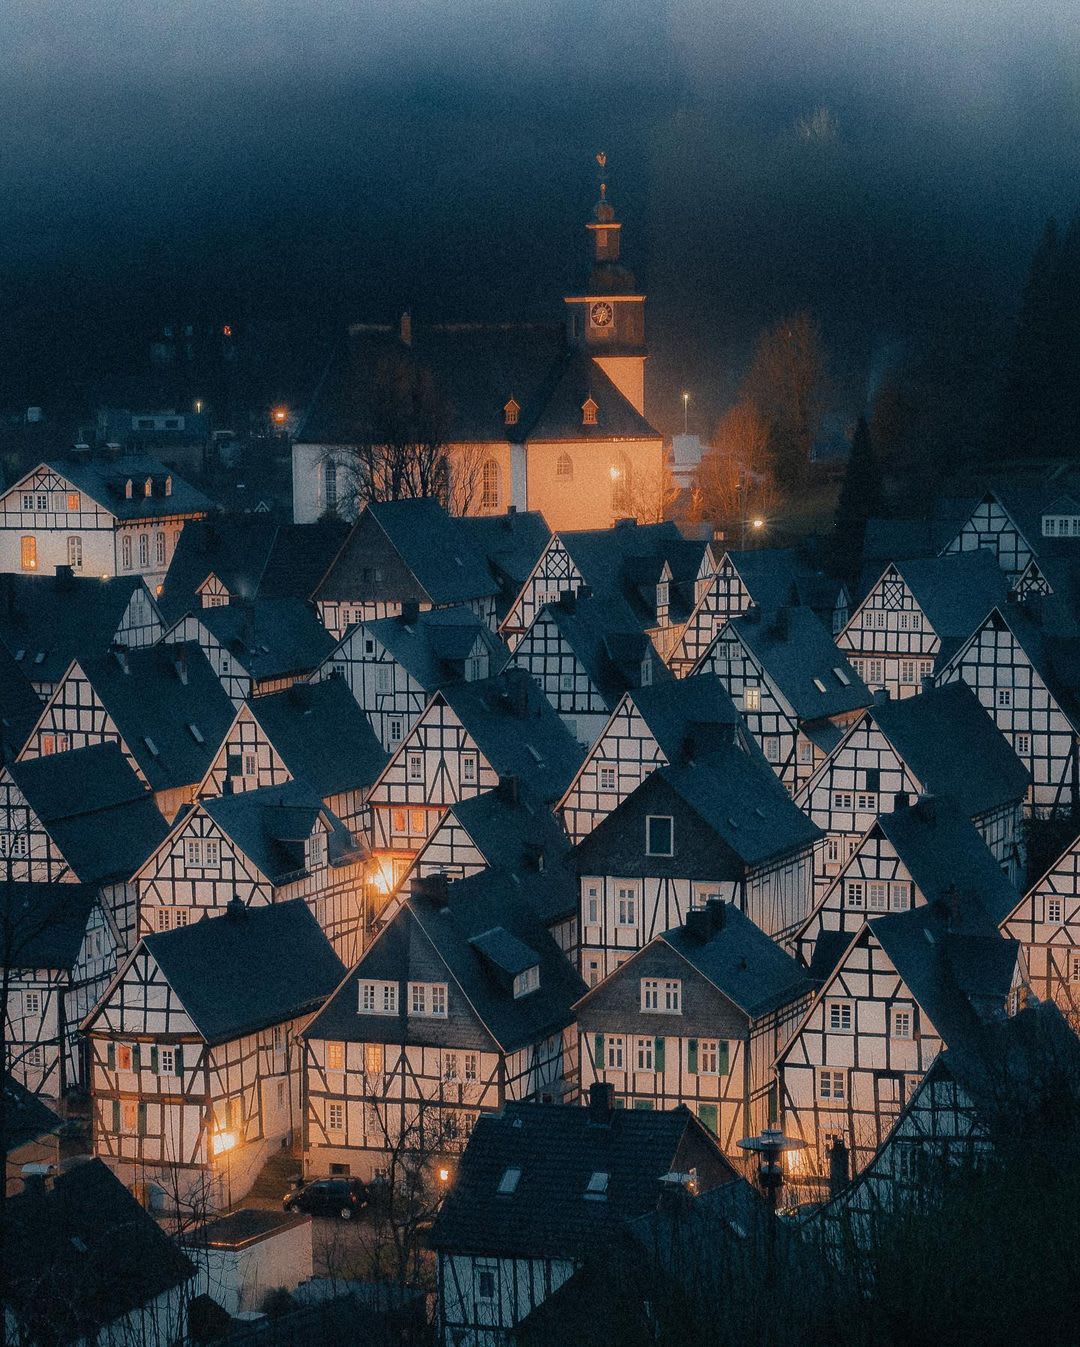 Winterly fog lifting over the timber framed houses in Monschau, Germany.